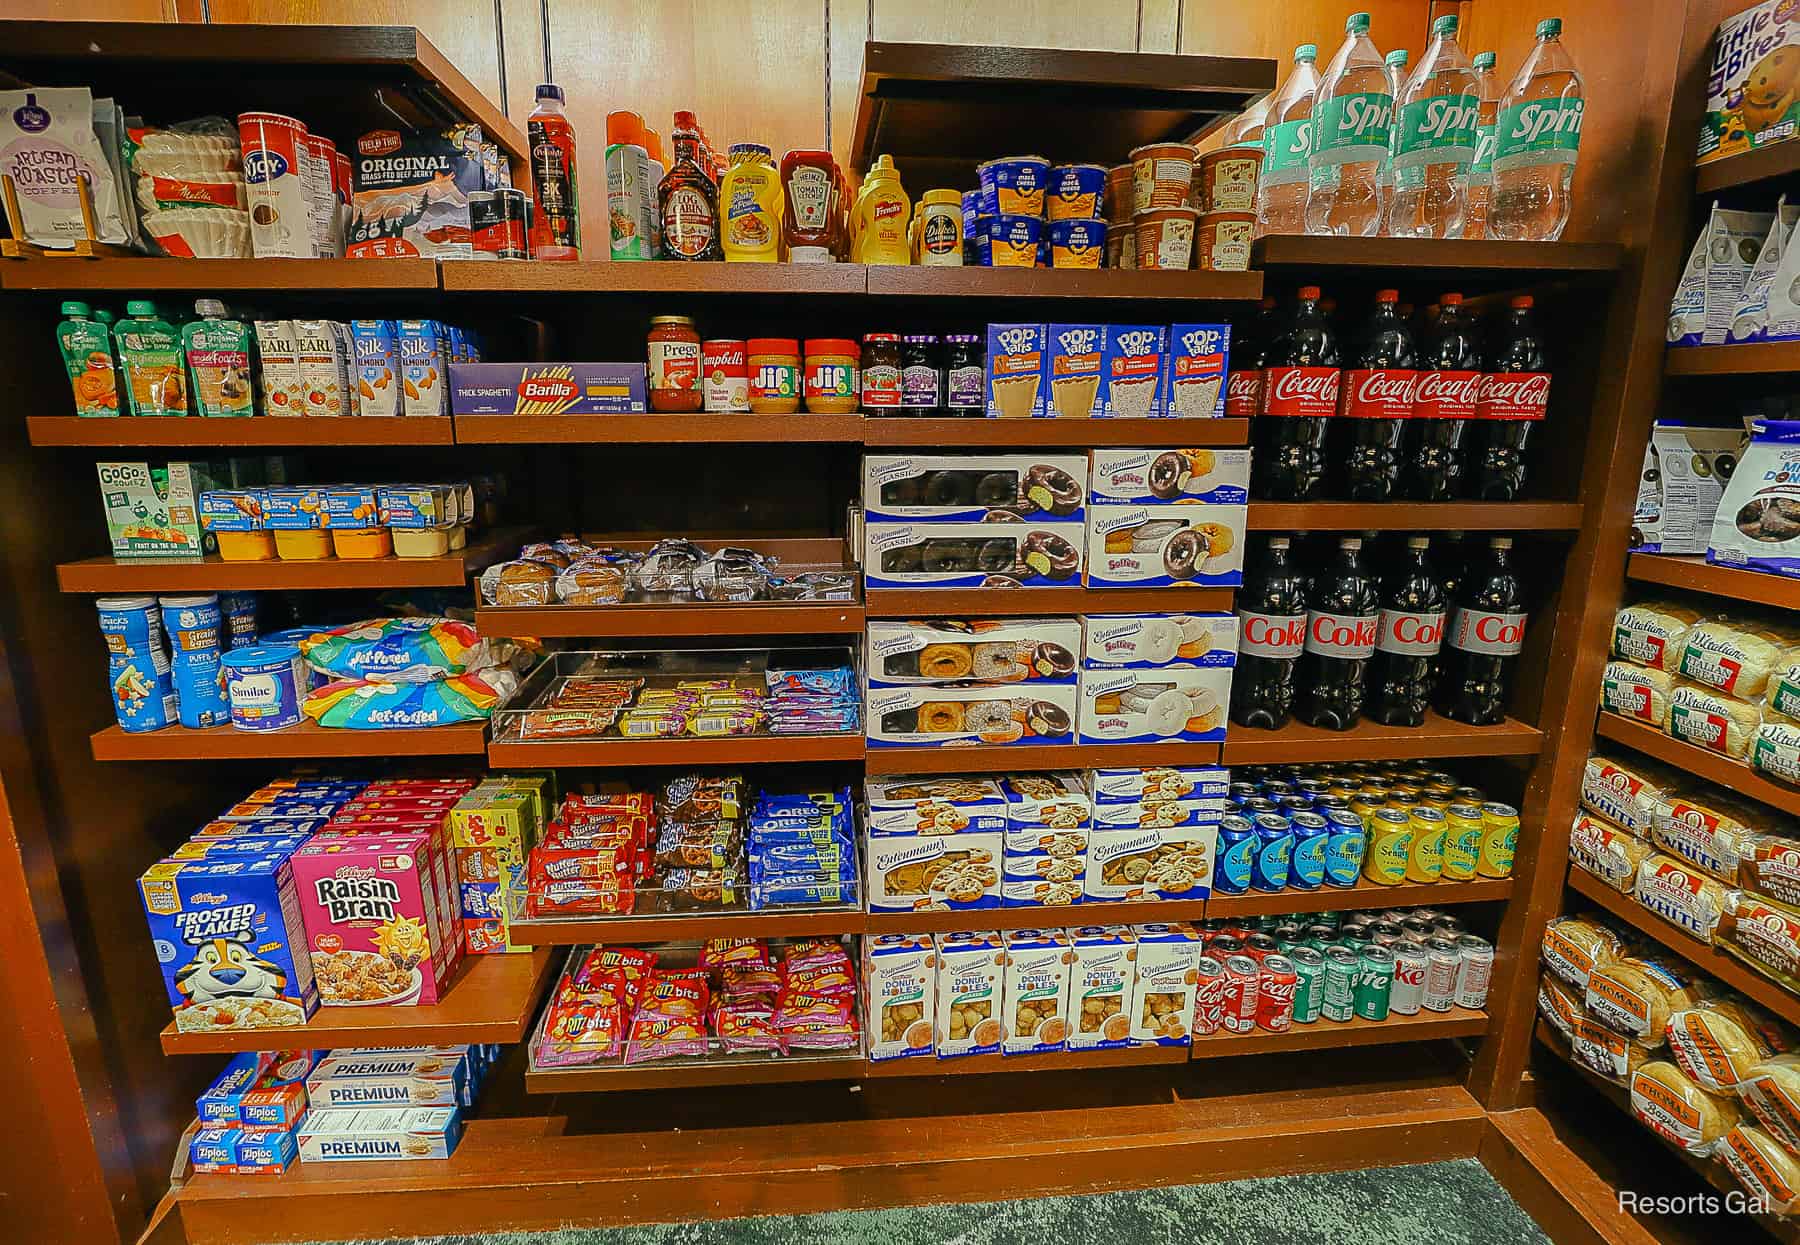 items like Entemann's branded pastries, soda, cereal, crackers, etc. 